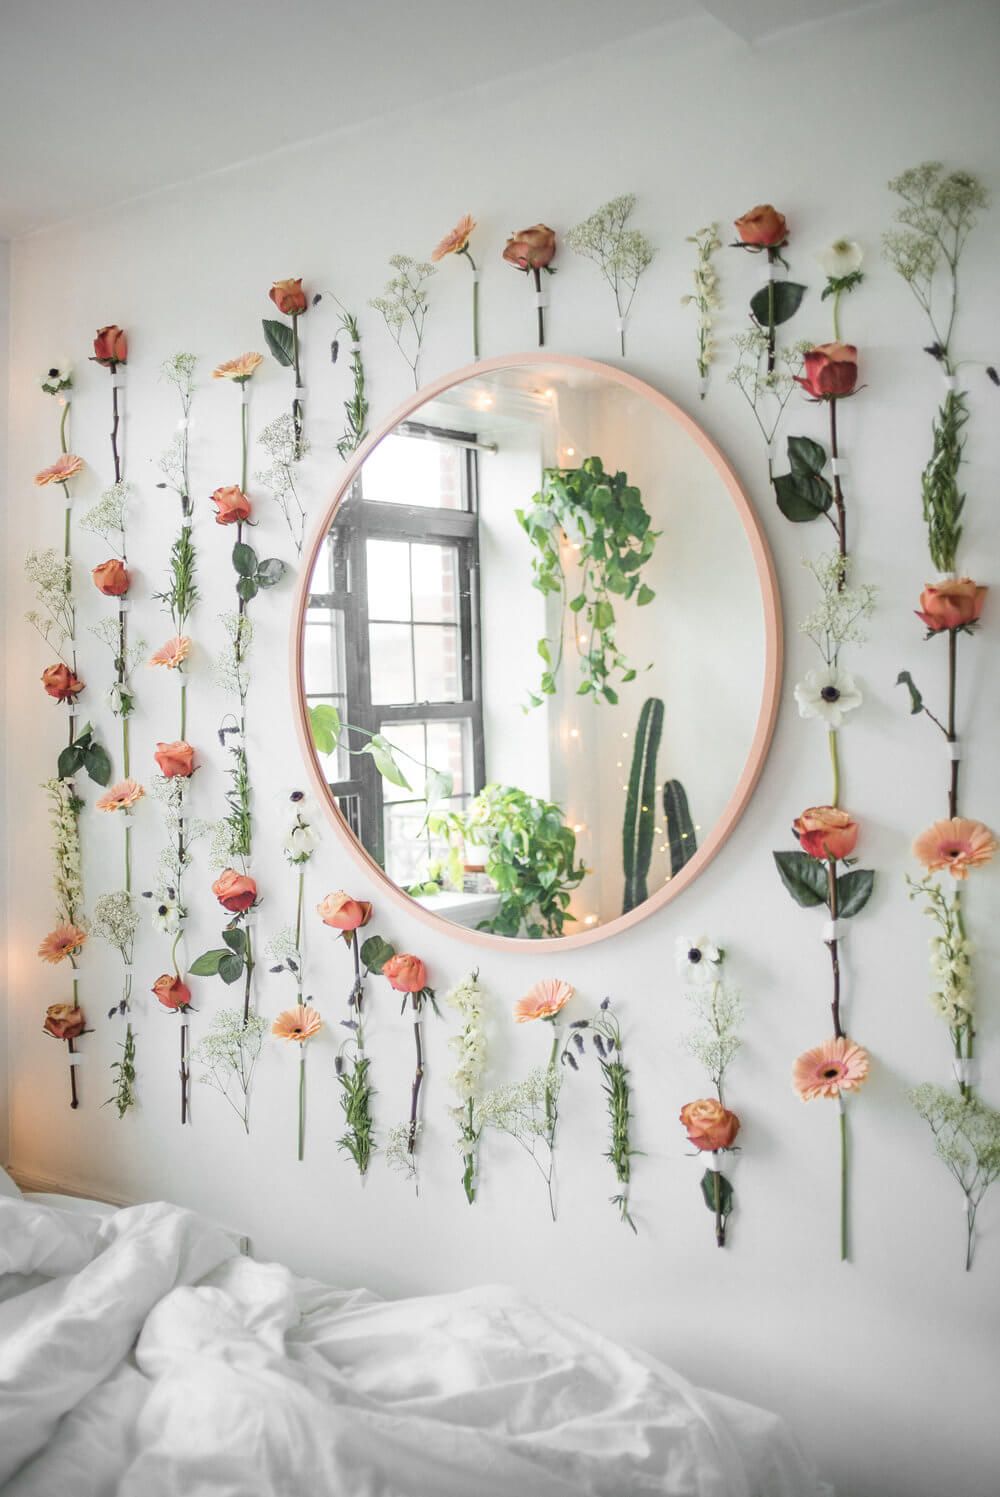 Are There Any Simple DIY Summer Garland or Hanging Decor Ideas?